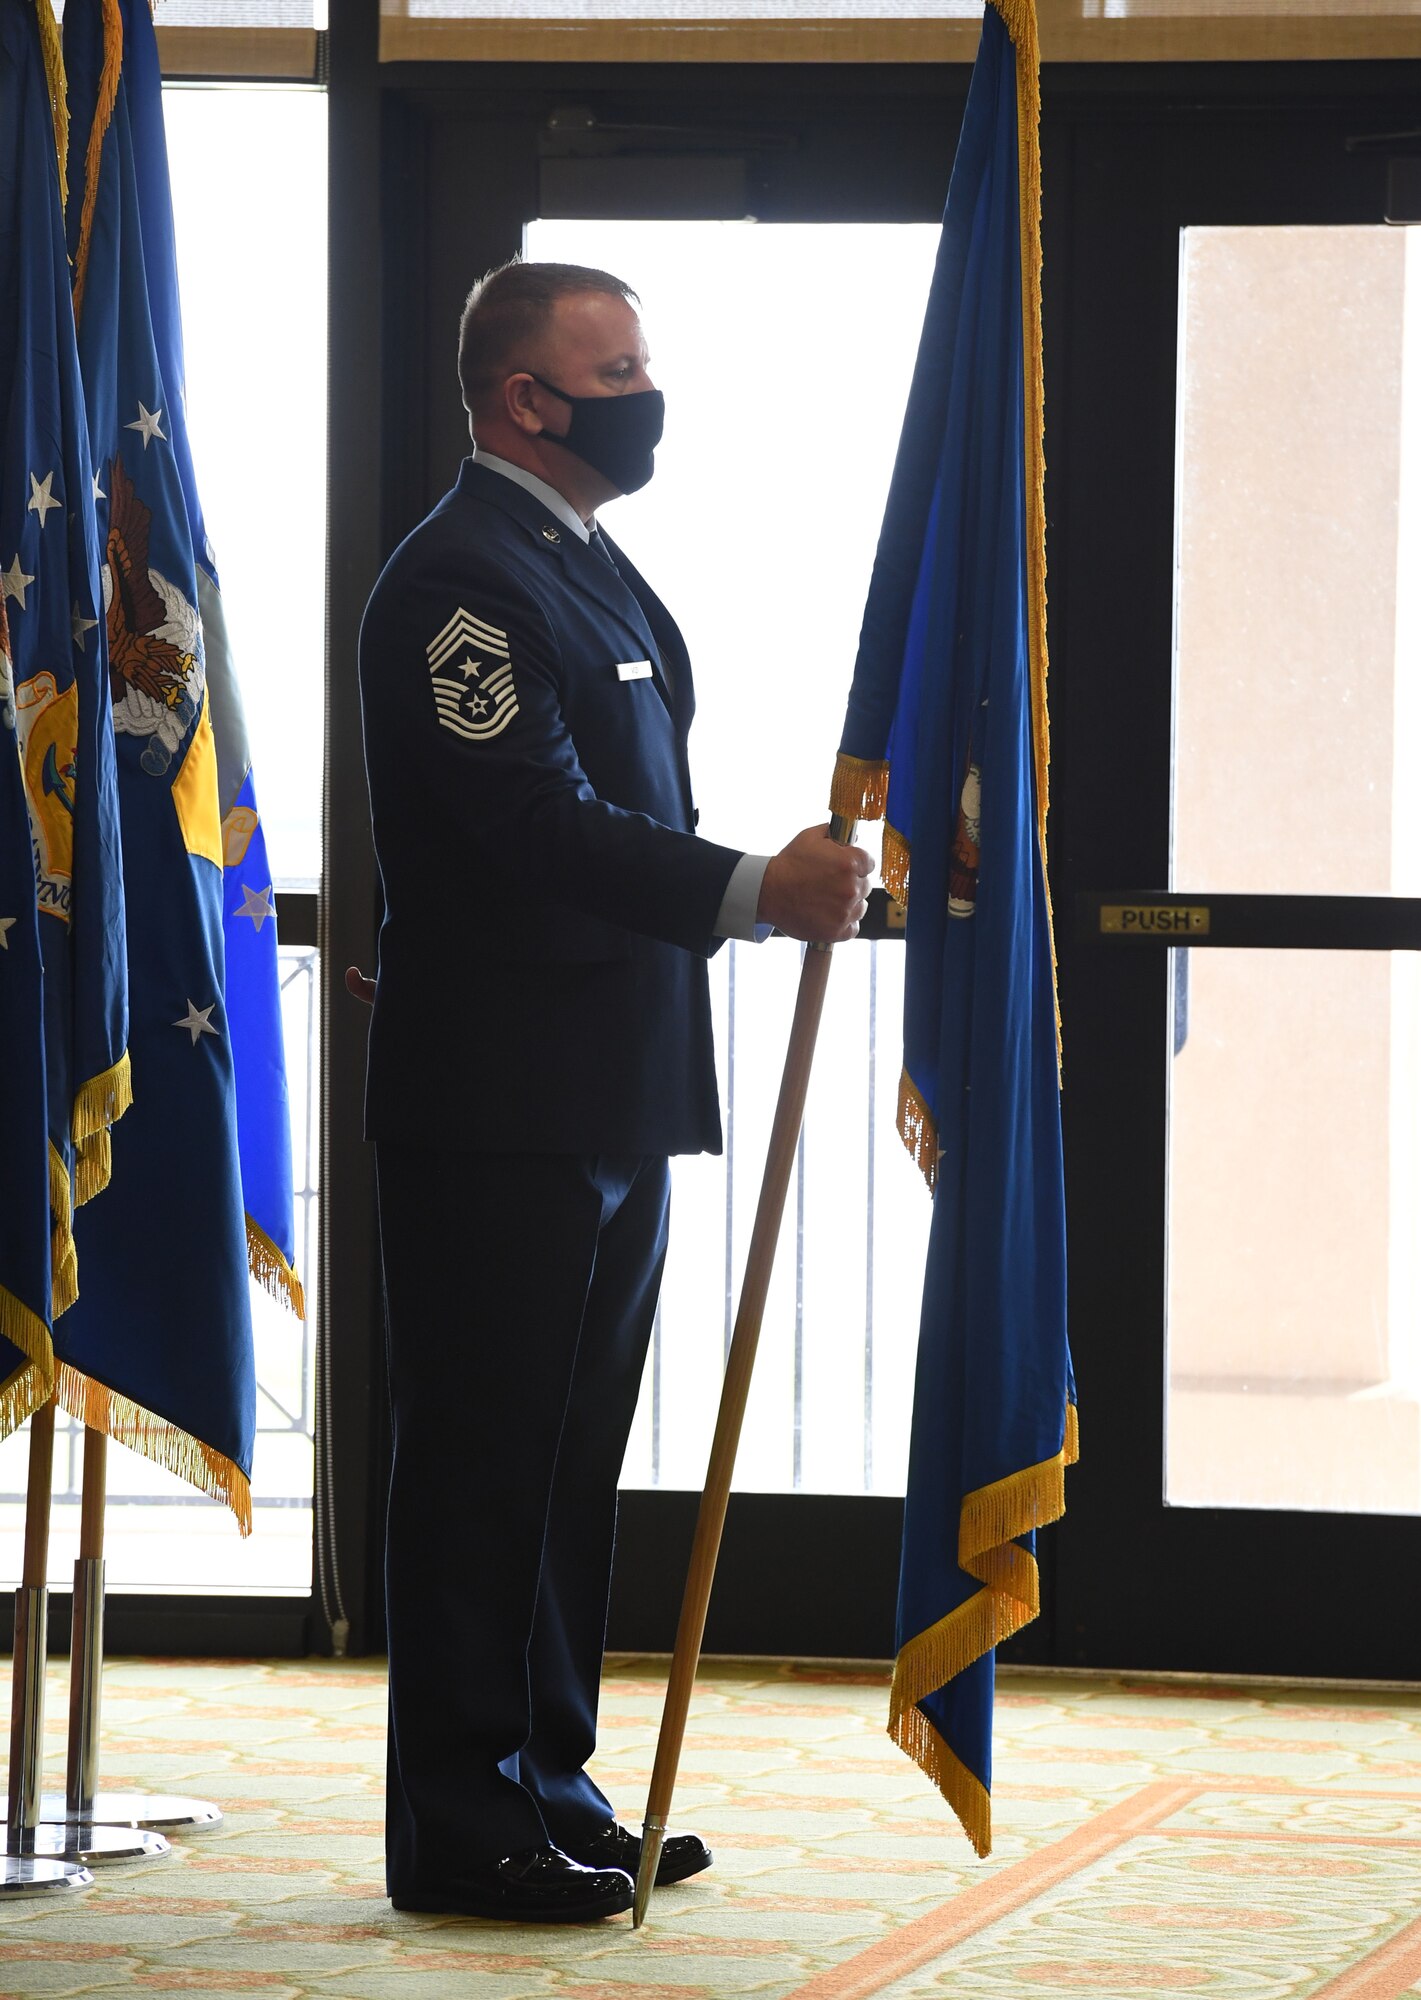 U.S. Air Force Chief Master Sgt. Adam Vizi, Second Air Force command chief holds the guidon during the Second Air Force change of command ceremony inside the Bay Breeze Event Center at Keesler Air Force Base, Mississippi, July 30, 2021. The ceremony is a symbol of command being exchanged from one commander to the next. Maj. Gen. Andrea Tullos relinquished command of the Second Air Force to Maj. Gen. Michele Edmondson. (U.S. Air Force photo by Kemberly Groue)